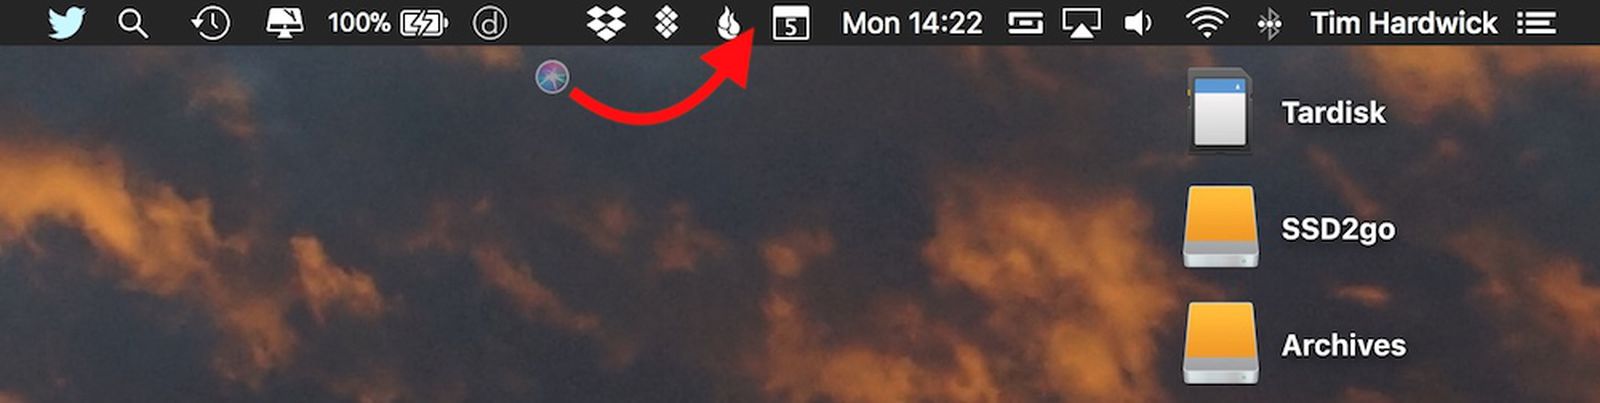 change an icon for an app mac